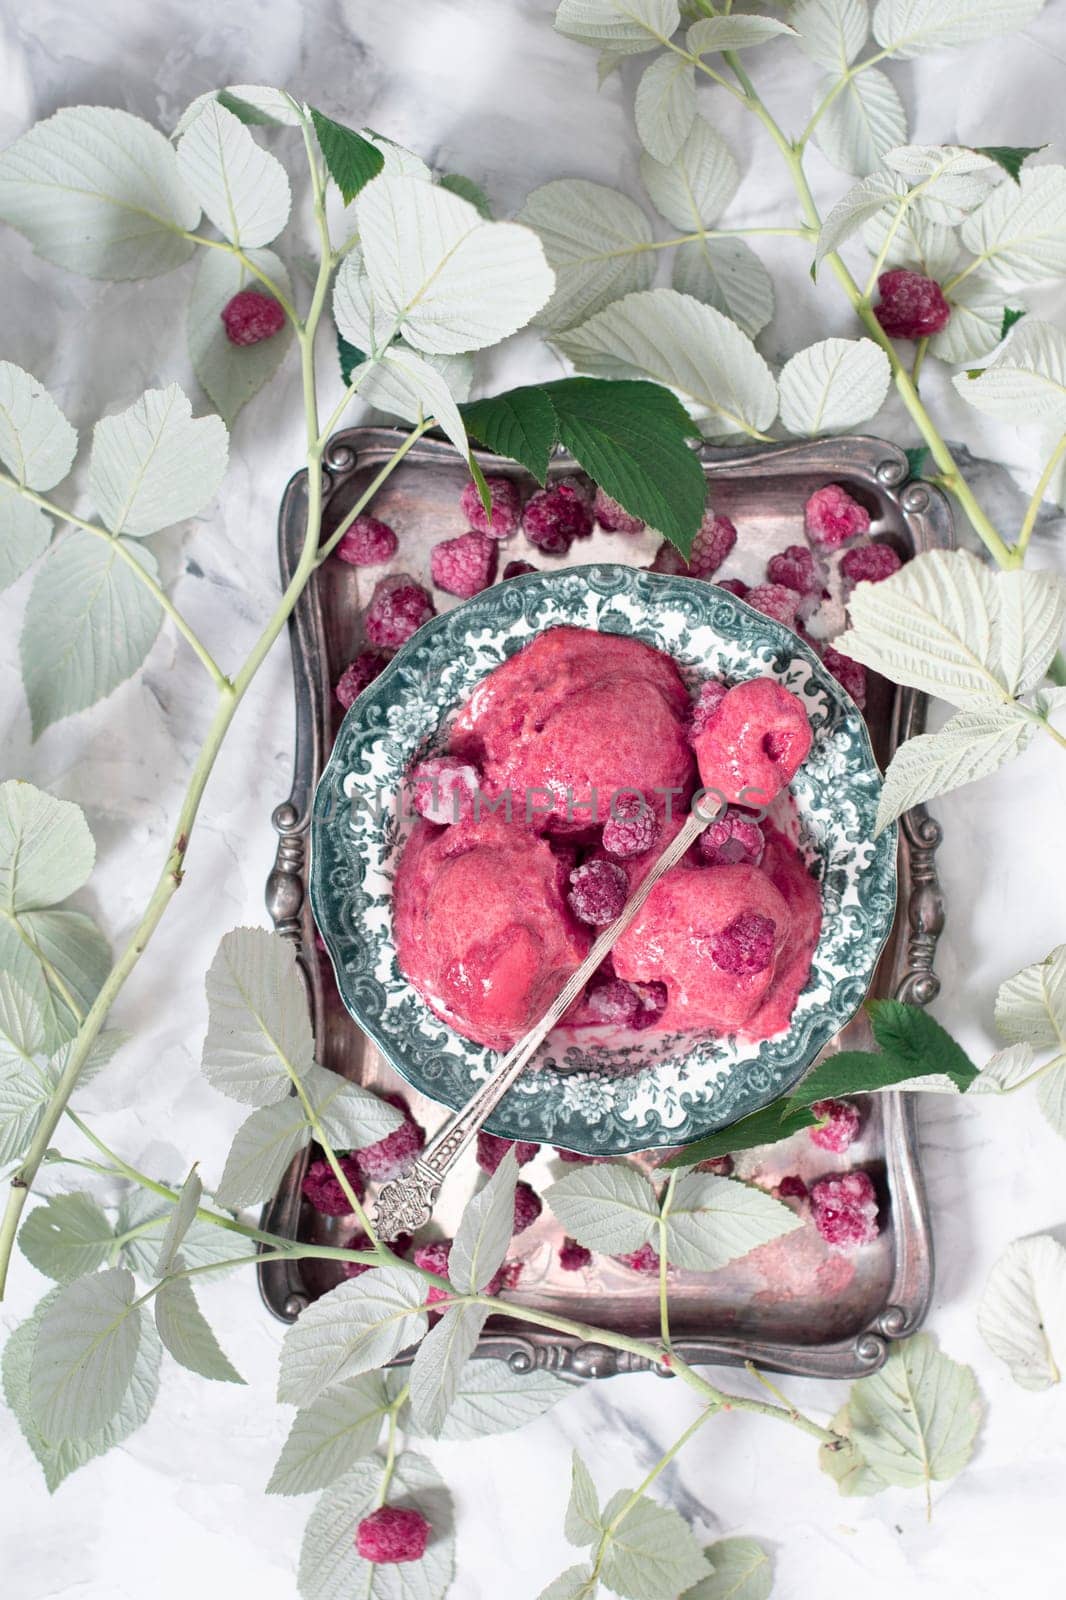 Raspberry purple ice cream sorbet on a silver plate surrounded by green leaves, summer dessert, top view. High quality photo